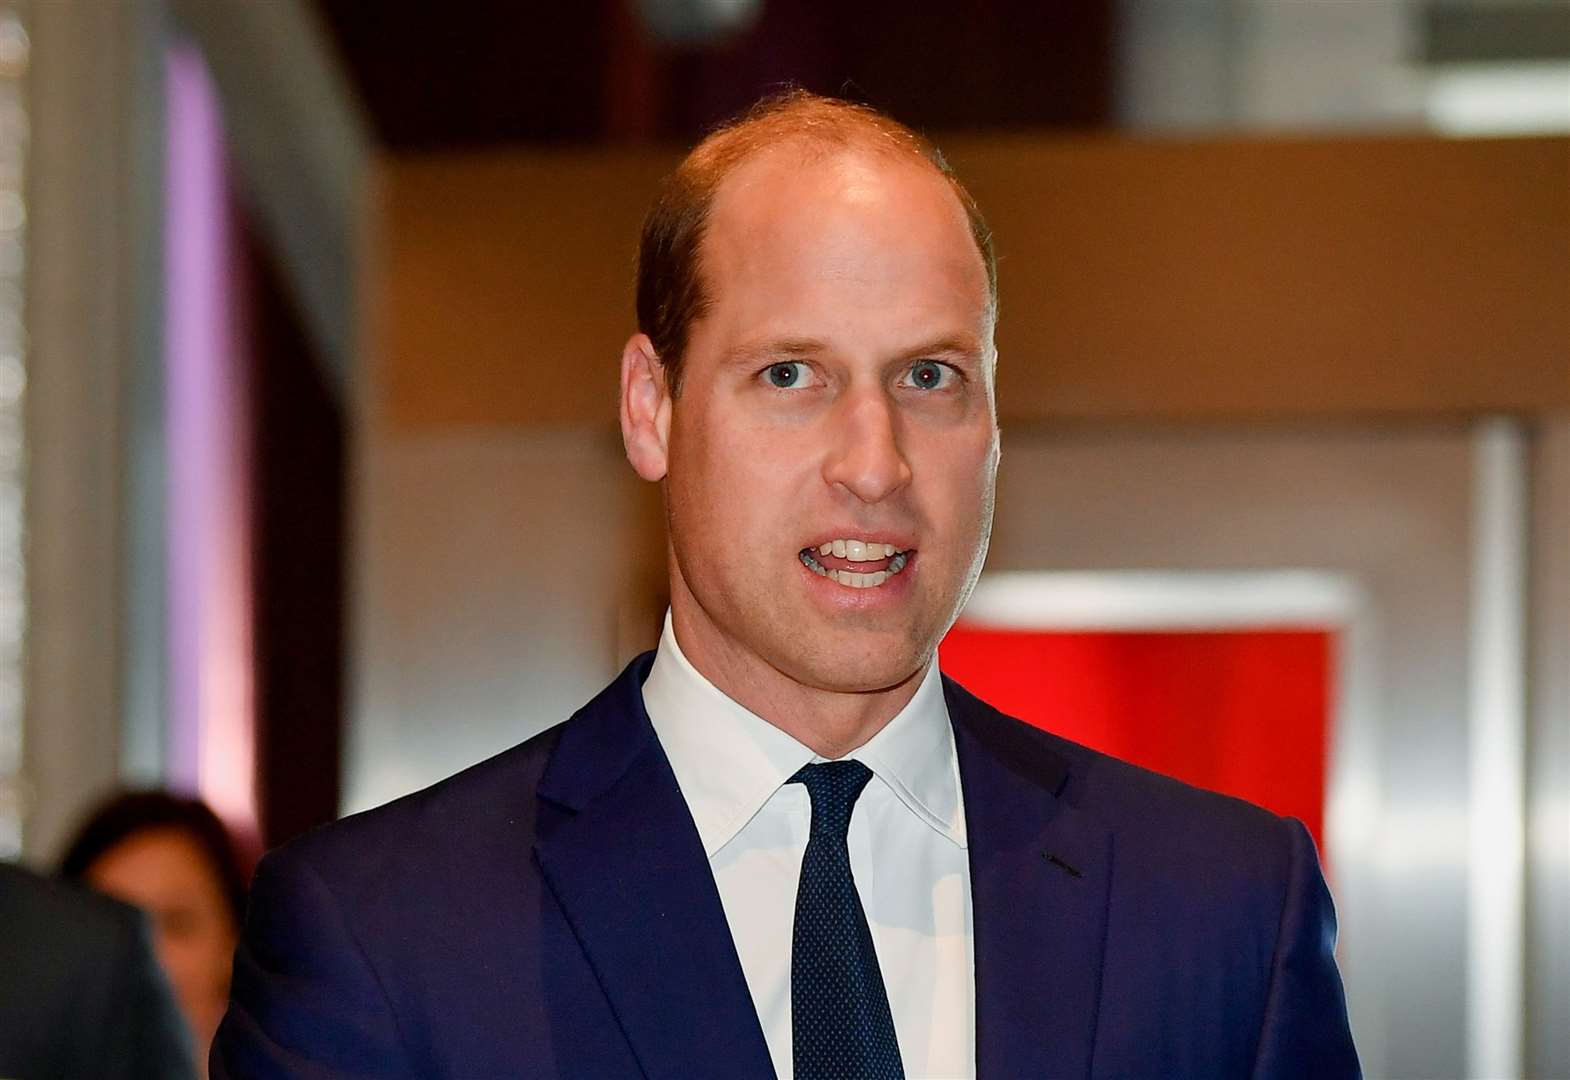 The Duke of Cambridge will be making his first official trip to the UAE in February (Toby Melville/PA)